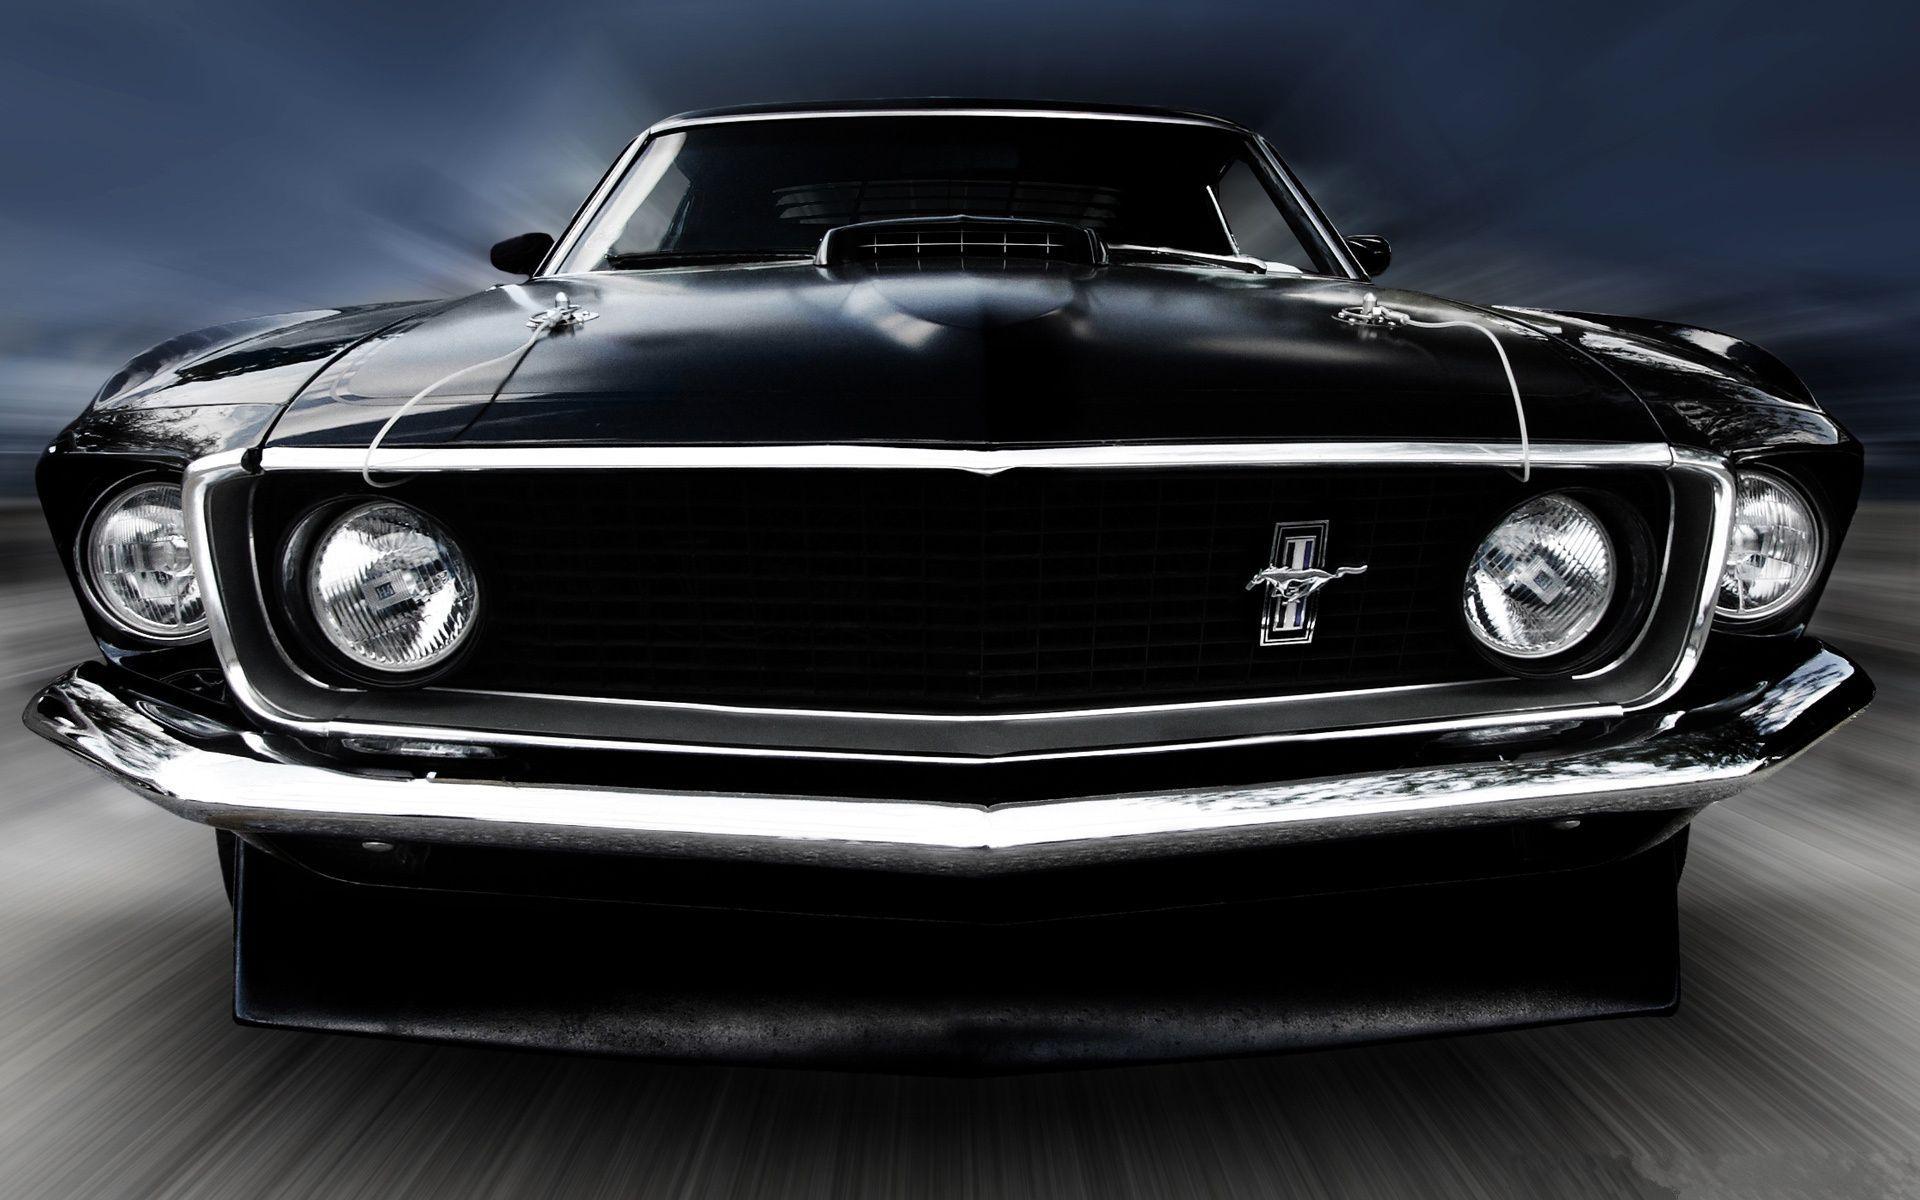 Ford Mustang Black Front HD Wallpaper. cool cars